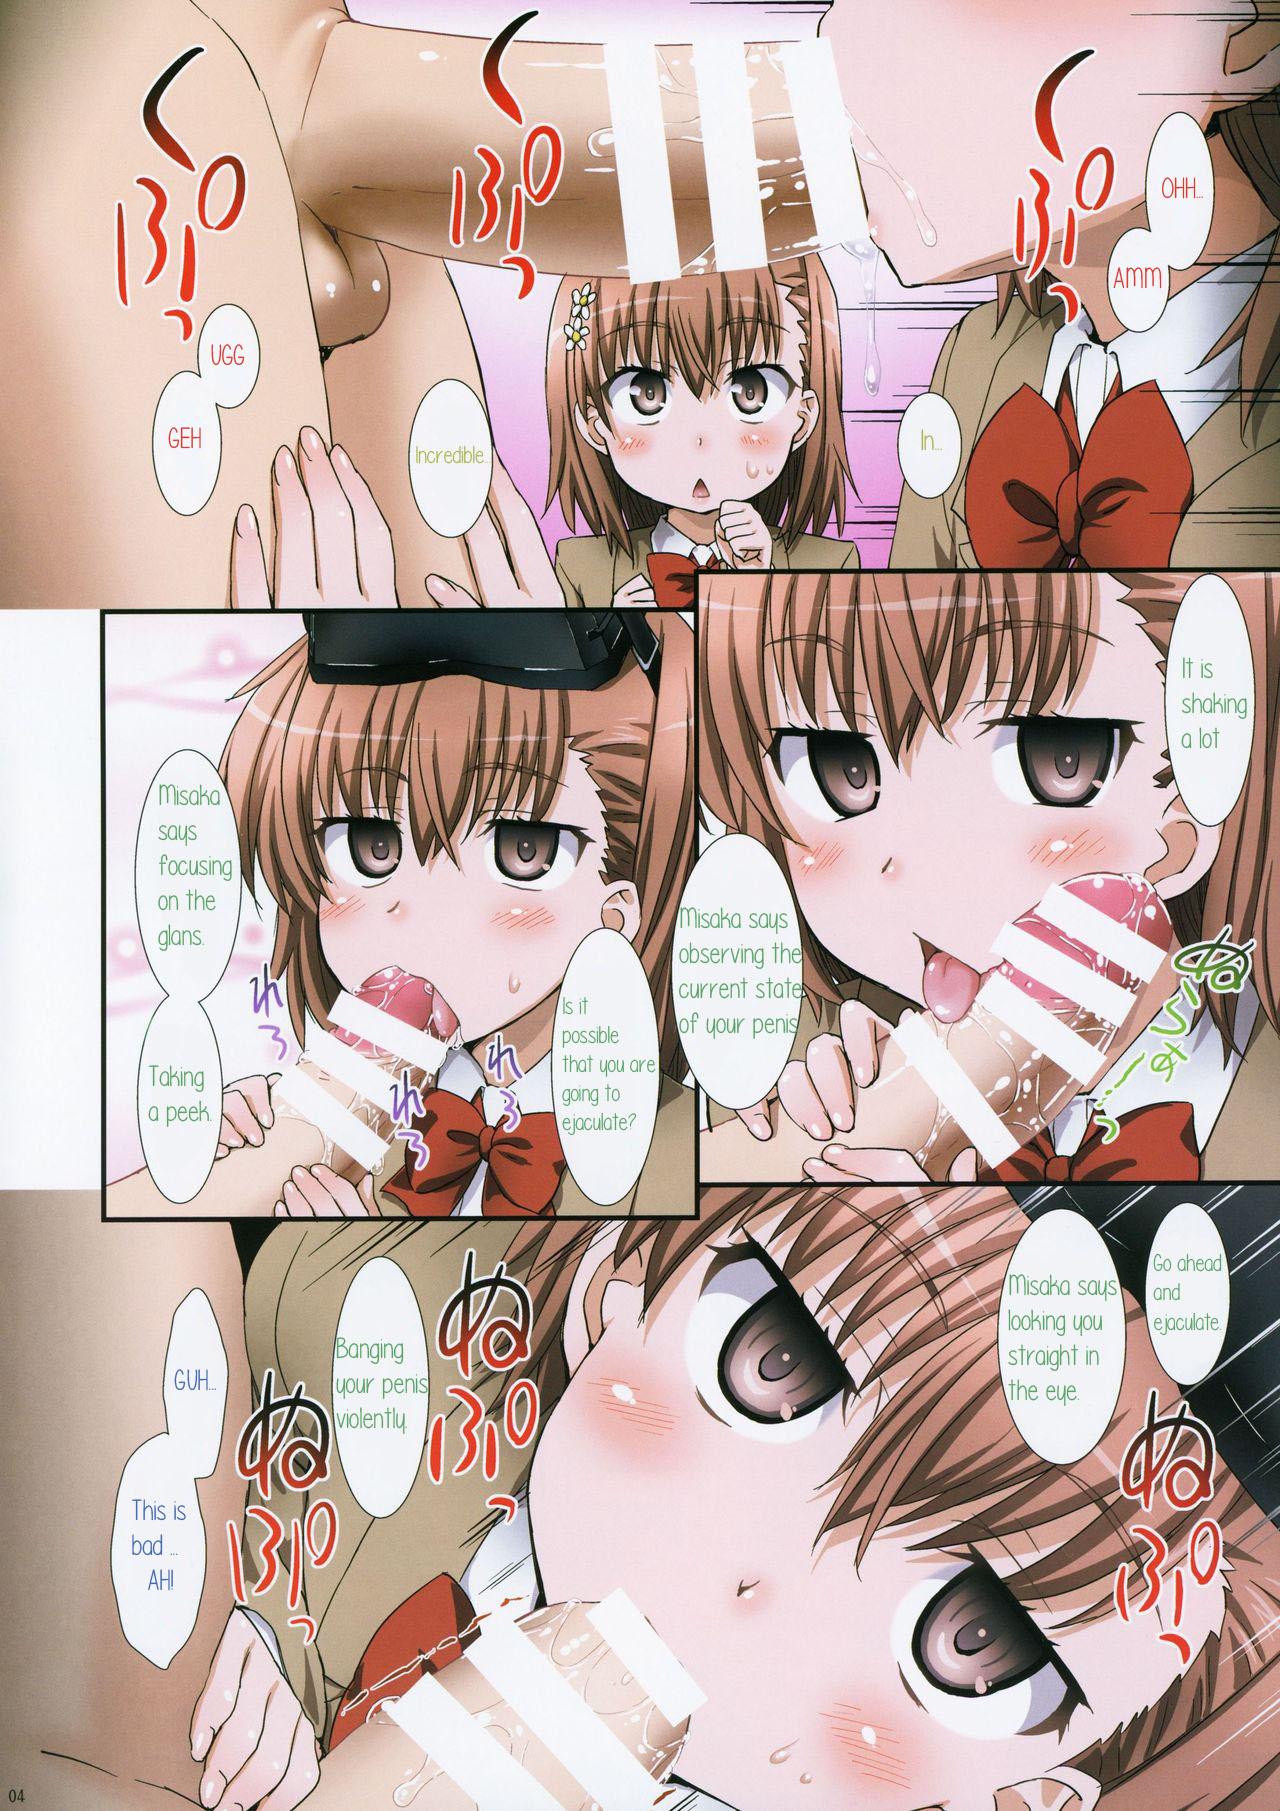 Gay Misaka to Misaka to Misaka wa Misaka - Toaru majutsu no index Doggy Style Porn - Page 4